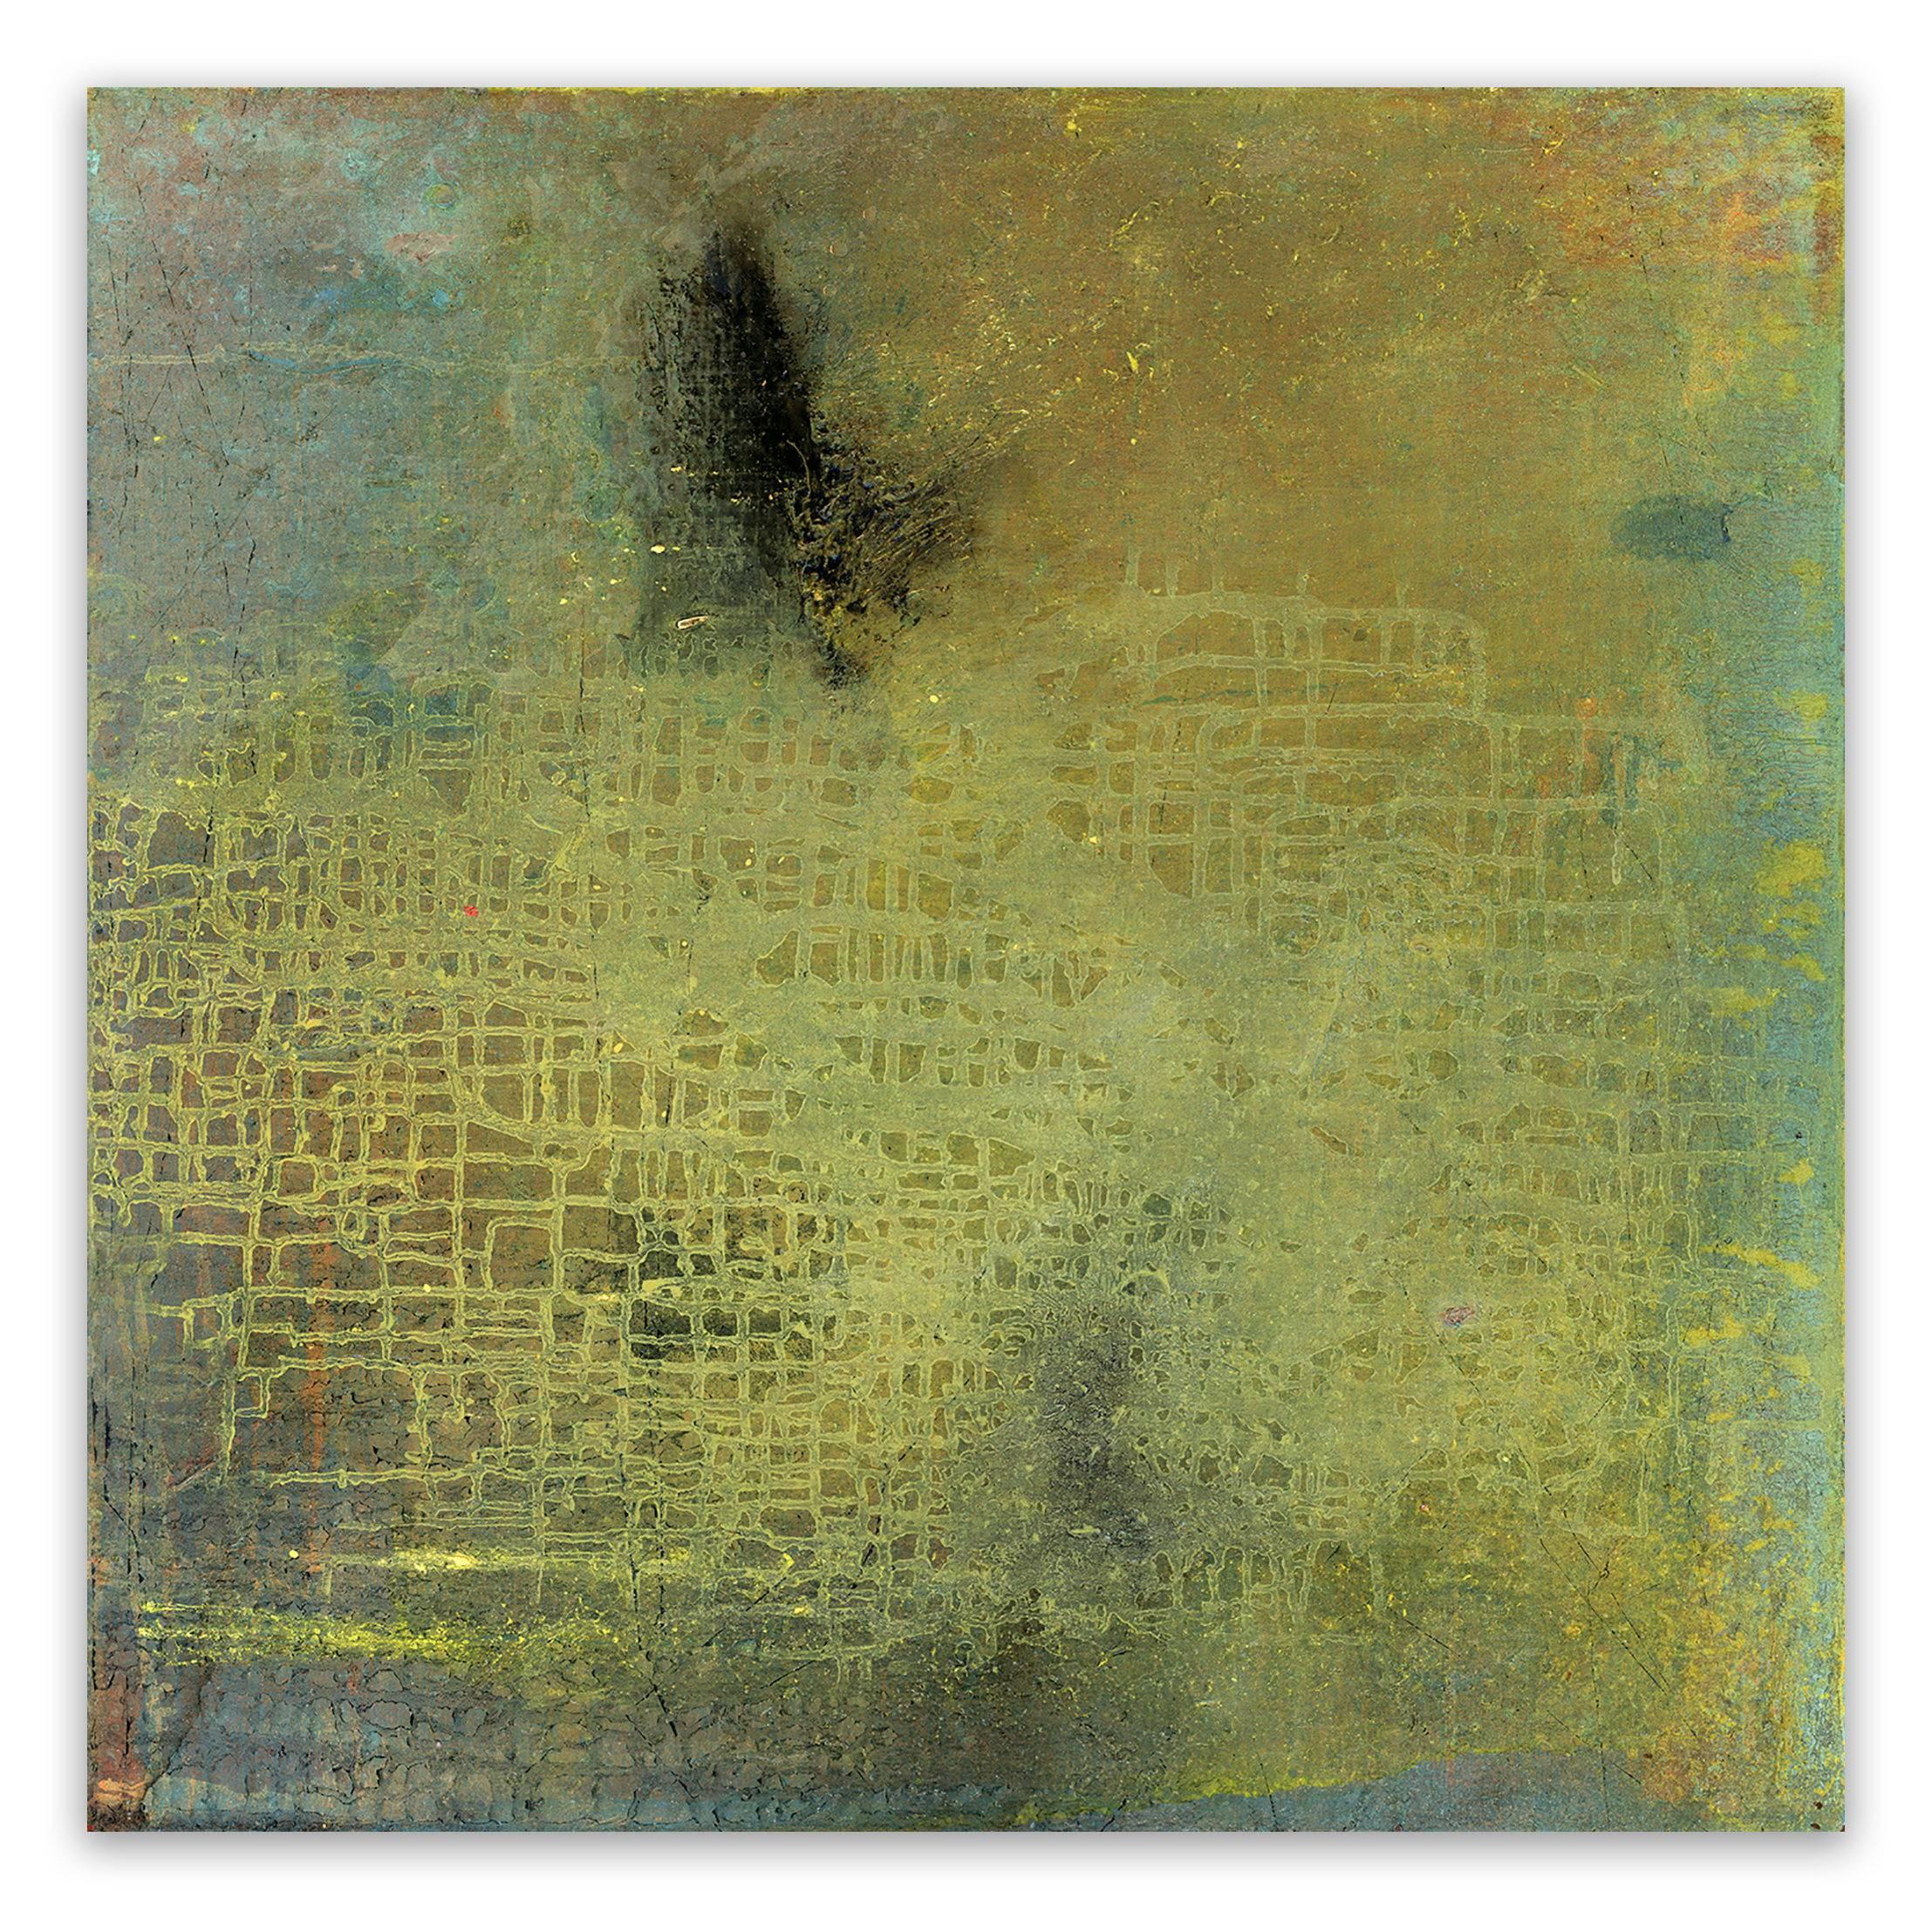 Conference of the birds no 28 (Abstract Painting)